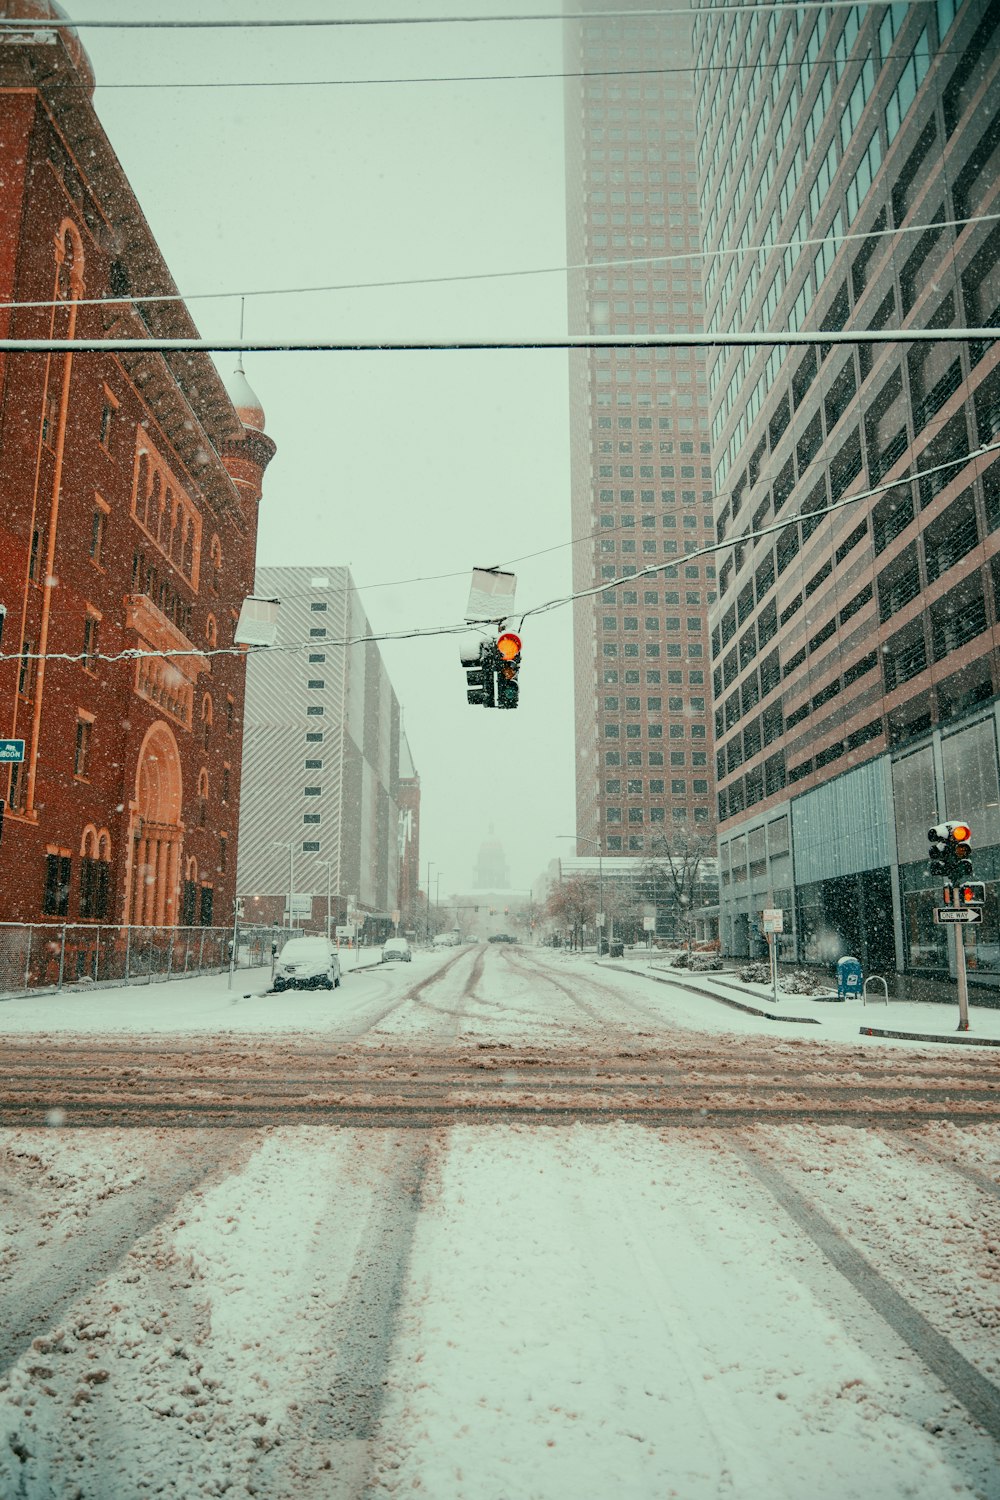 a snowy street with traffic lights and buildings